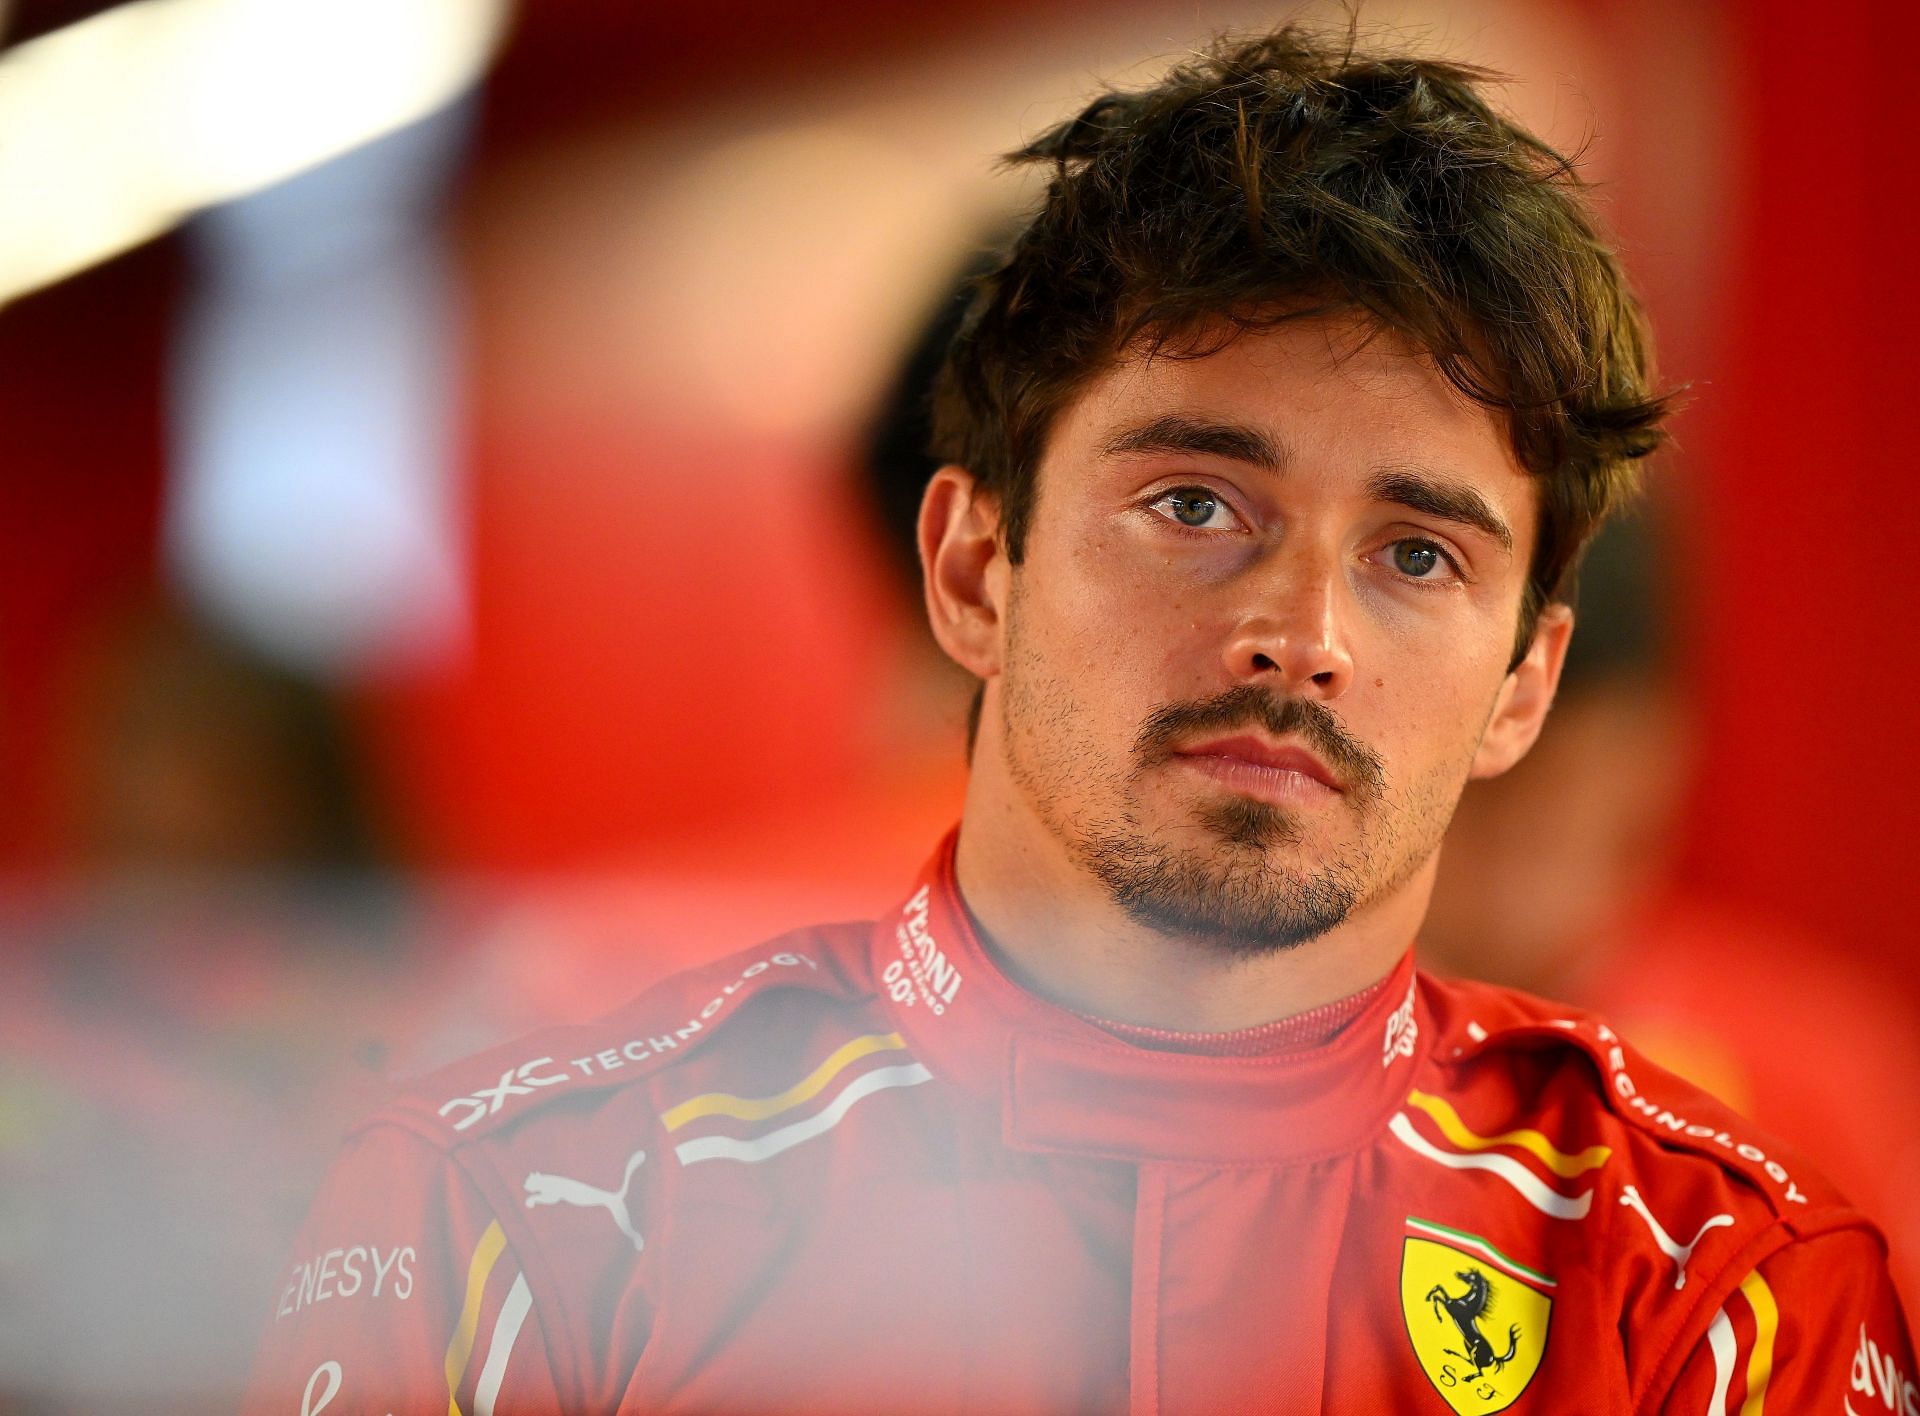 "Heart Breaking" Fans react to Charles Leclerc not being sure of why